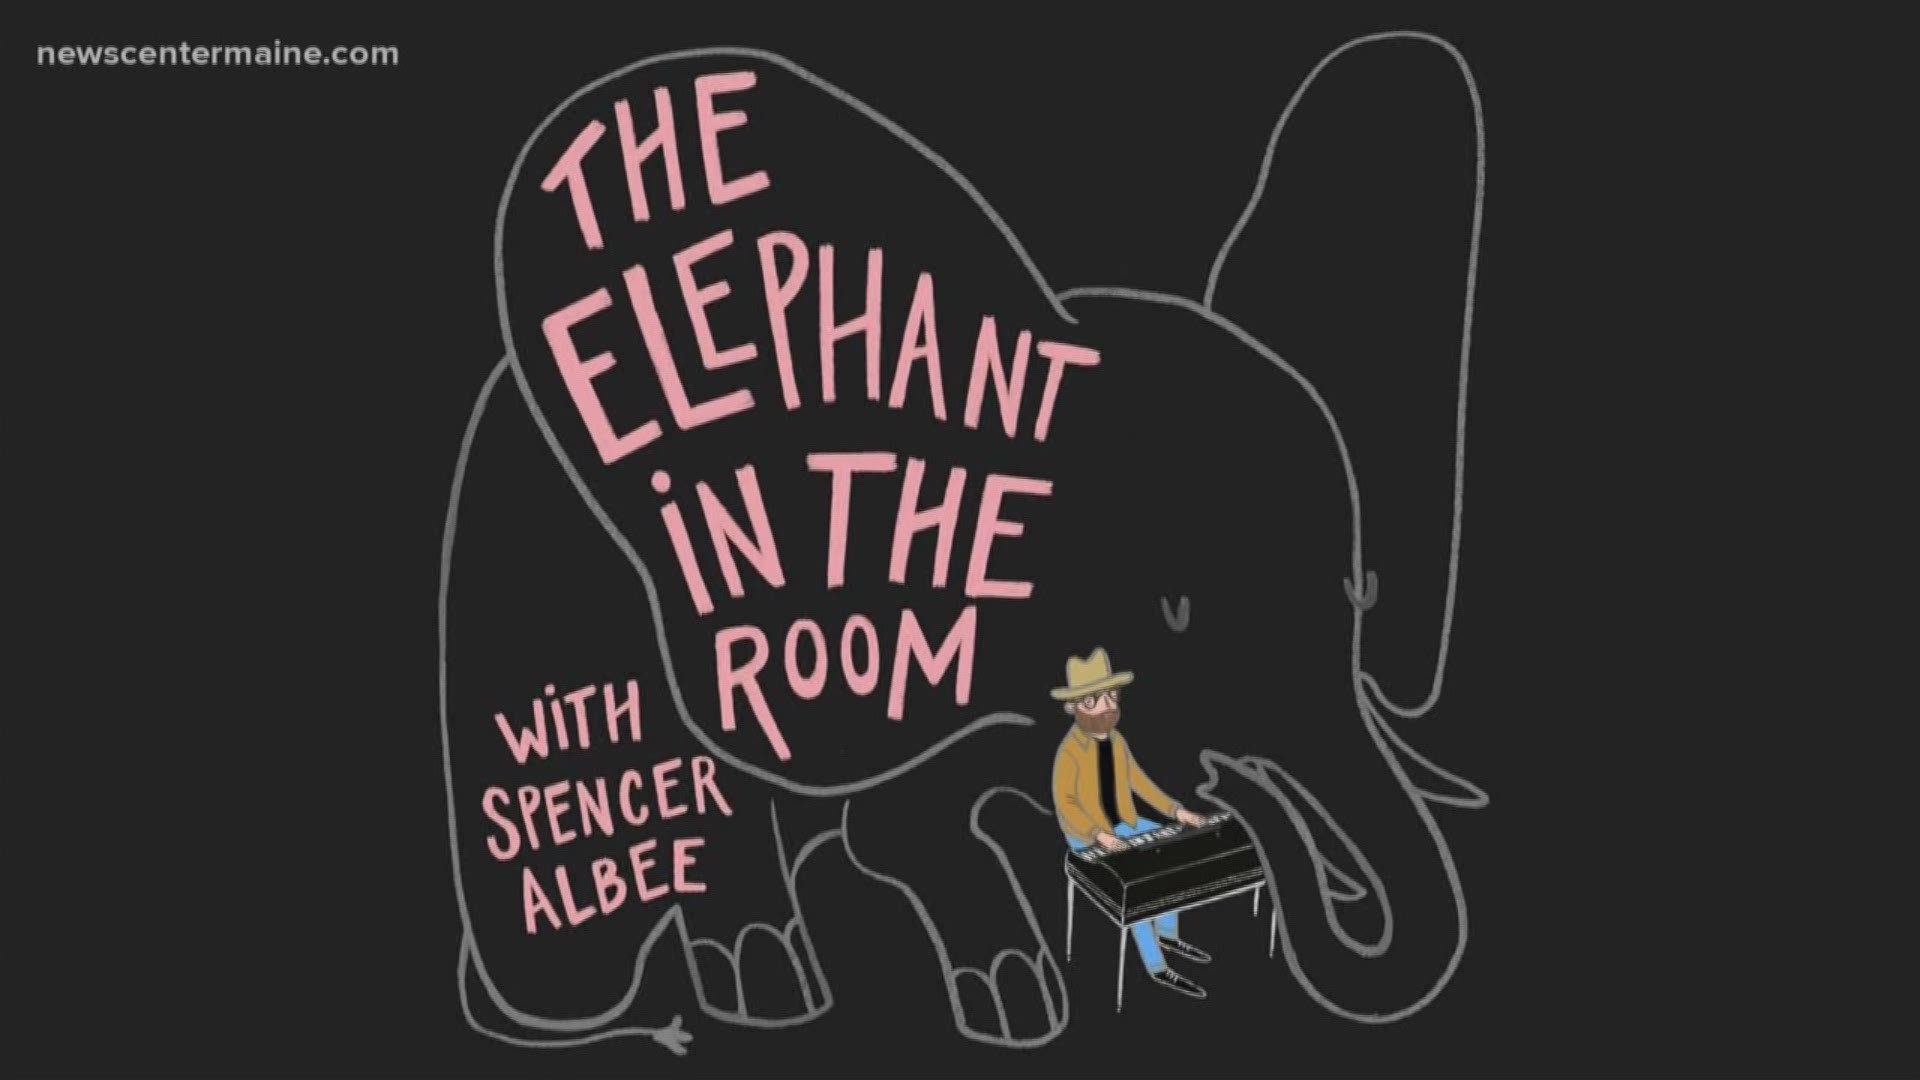 Spencer Albee introduces his newest project, a variety show, The Elephant in the Room.